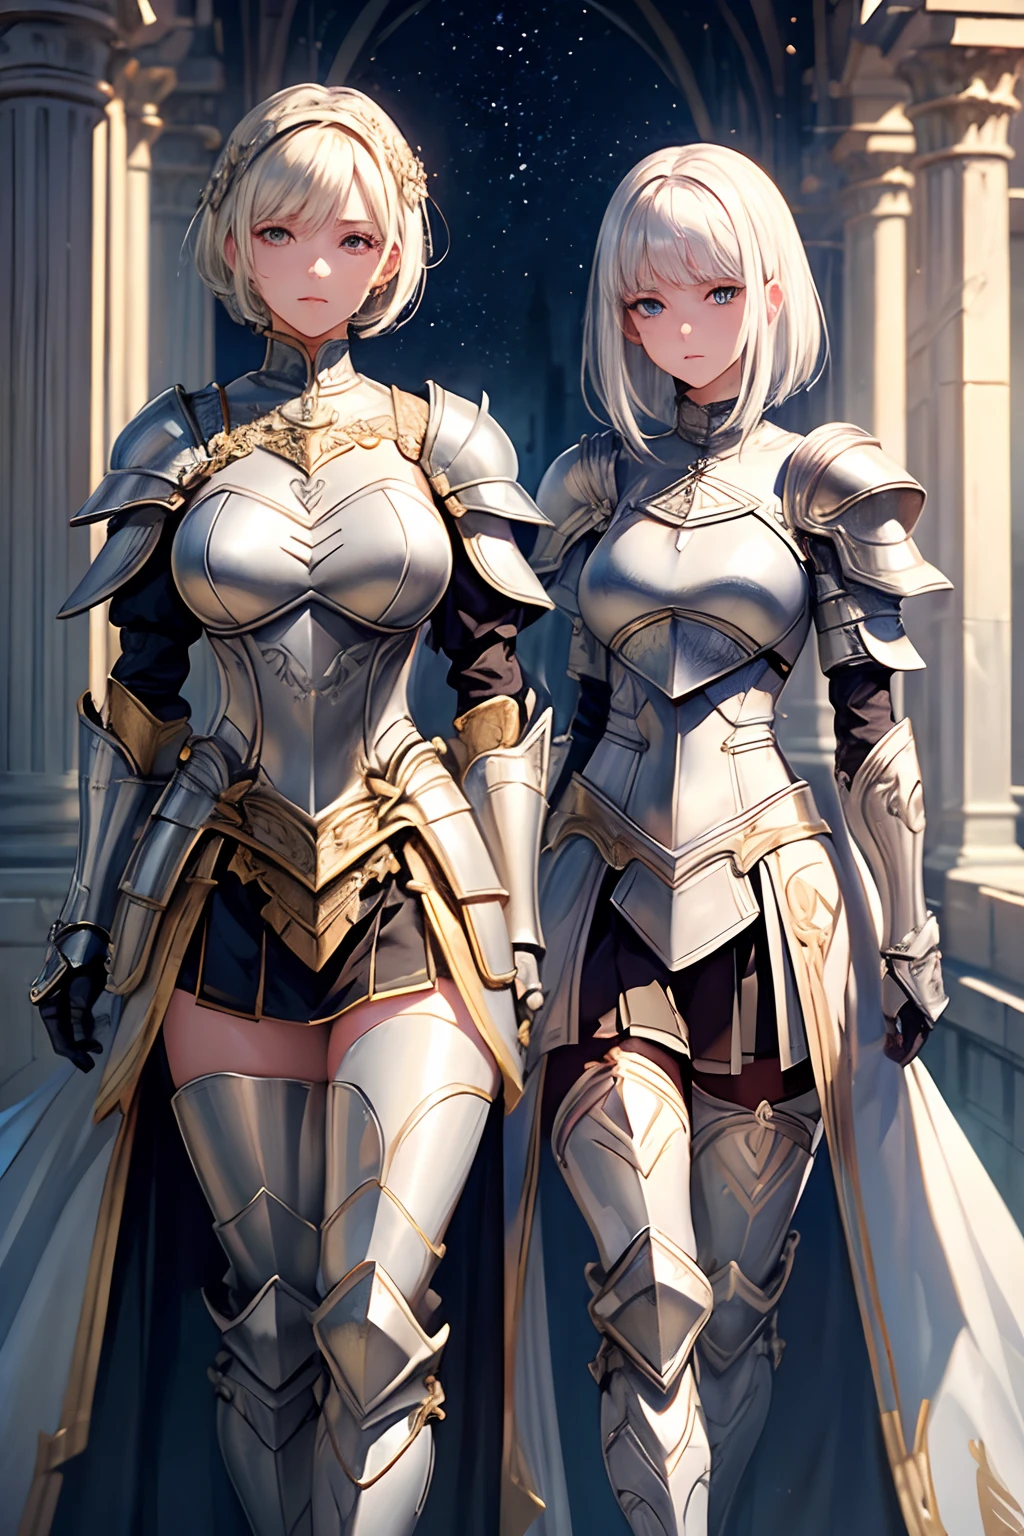 (((masterpiece))), (((best quality))), ((ultra-detailed)), (cinematic lighting), (illustration), (beautiful detailed eyes), (2girls), full body, space, knight, armour, light hair, skirt, walking, ruins, (masterpiece, 2girls A and B), best quality, expressive eyes, perfect face, Girl A: (blonde hair, long hair, wearing skirt, black pantyhose, white and gold armour), Girl B: (white hair, short hair, jumpsuit, silver armour),